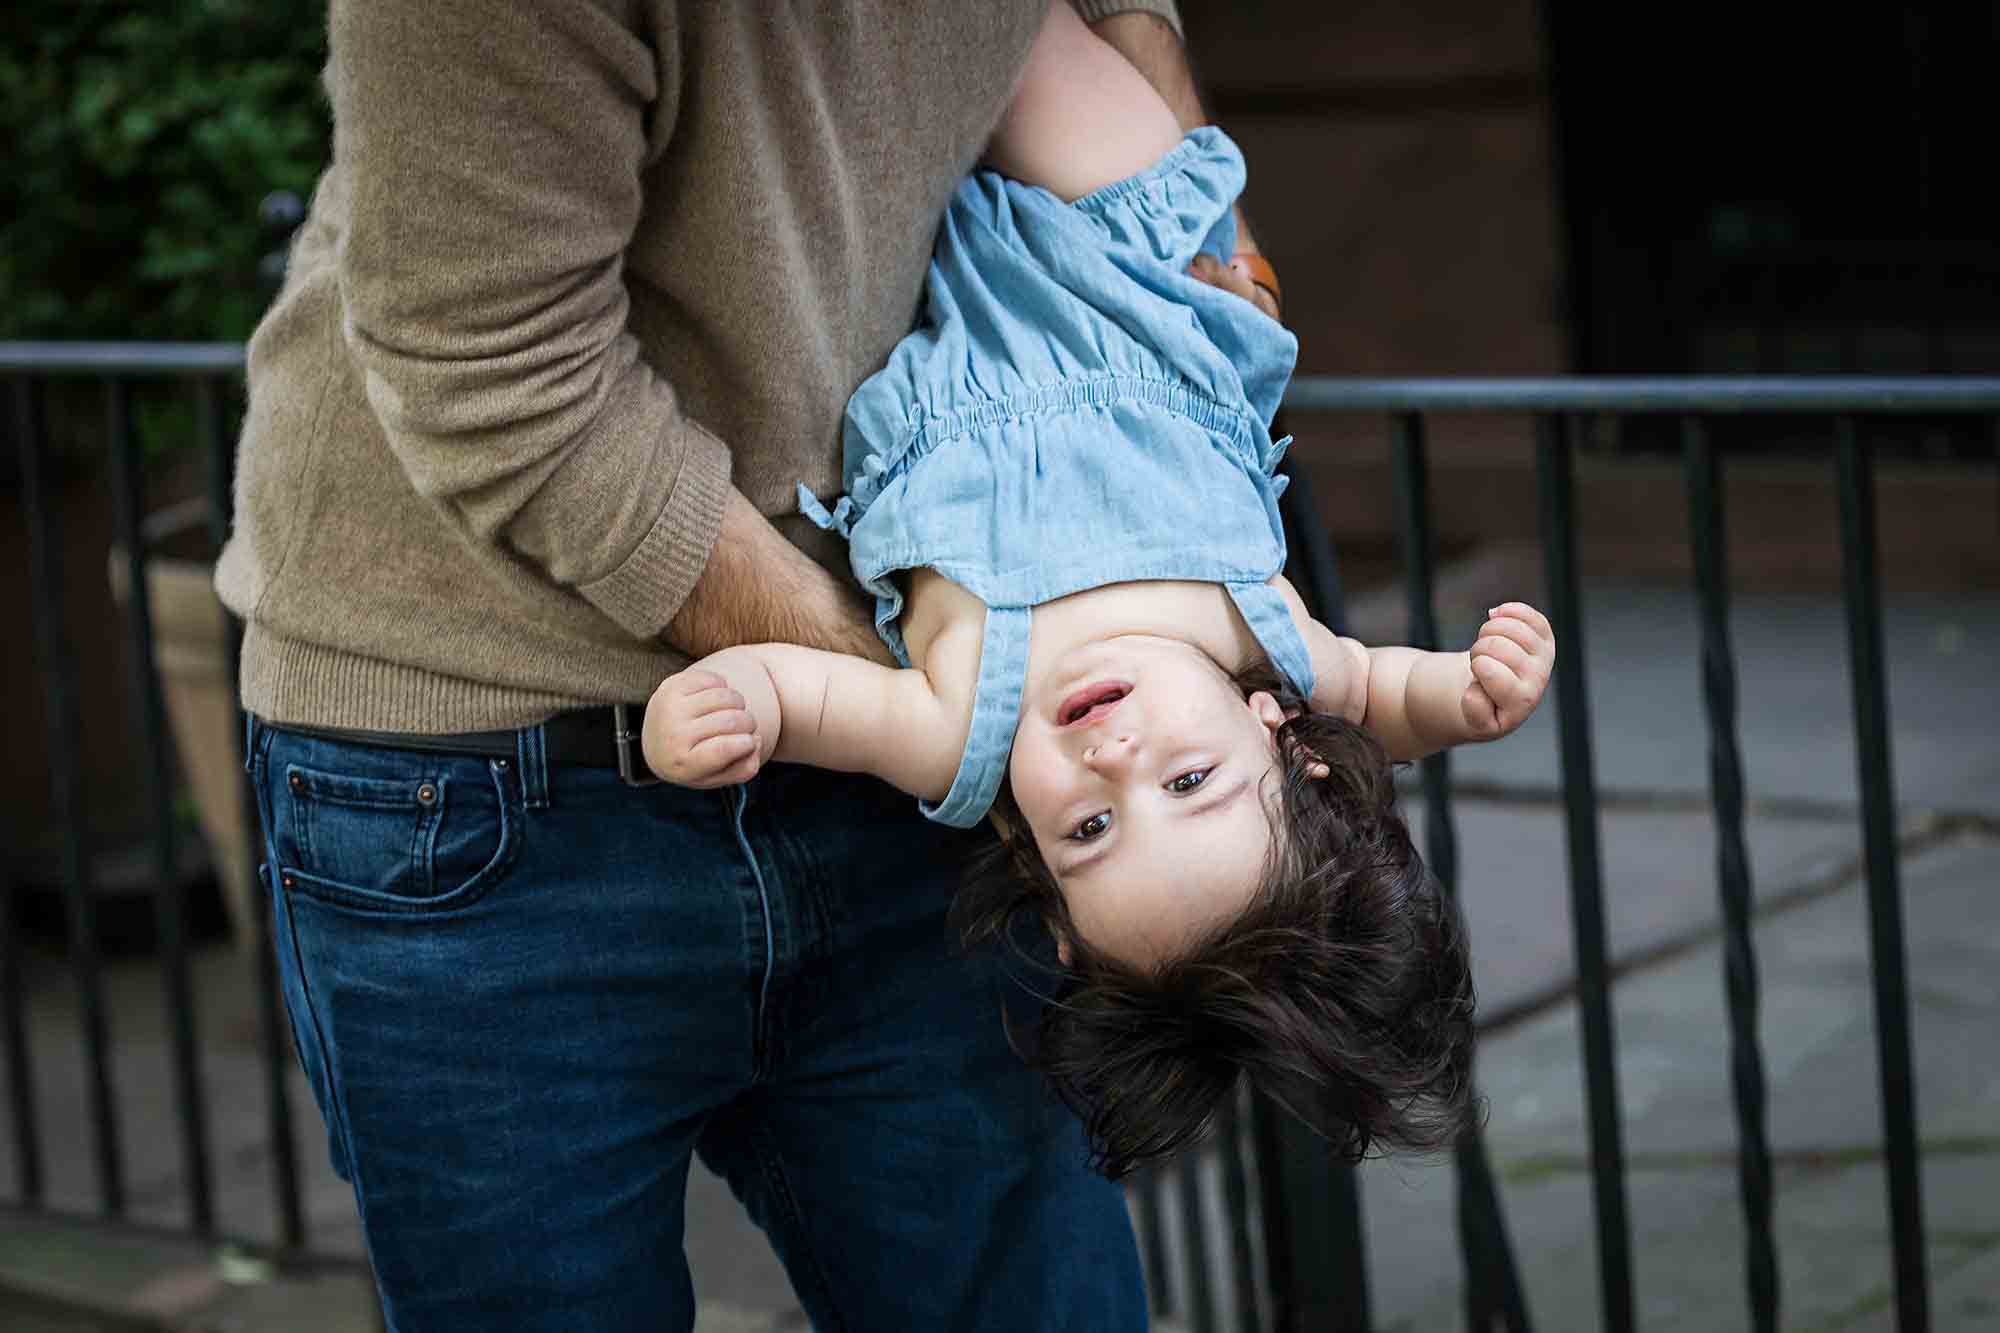 A little girl held upside down by her father for an article on how to solve family portrait challenges